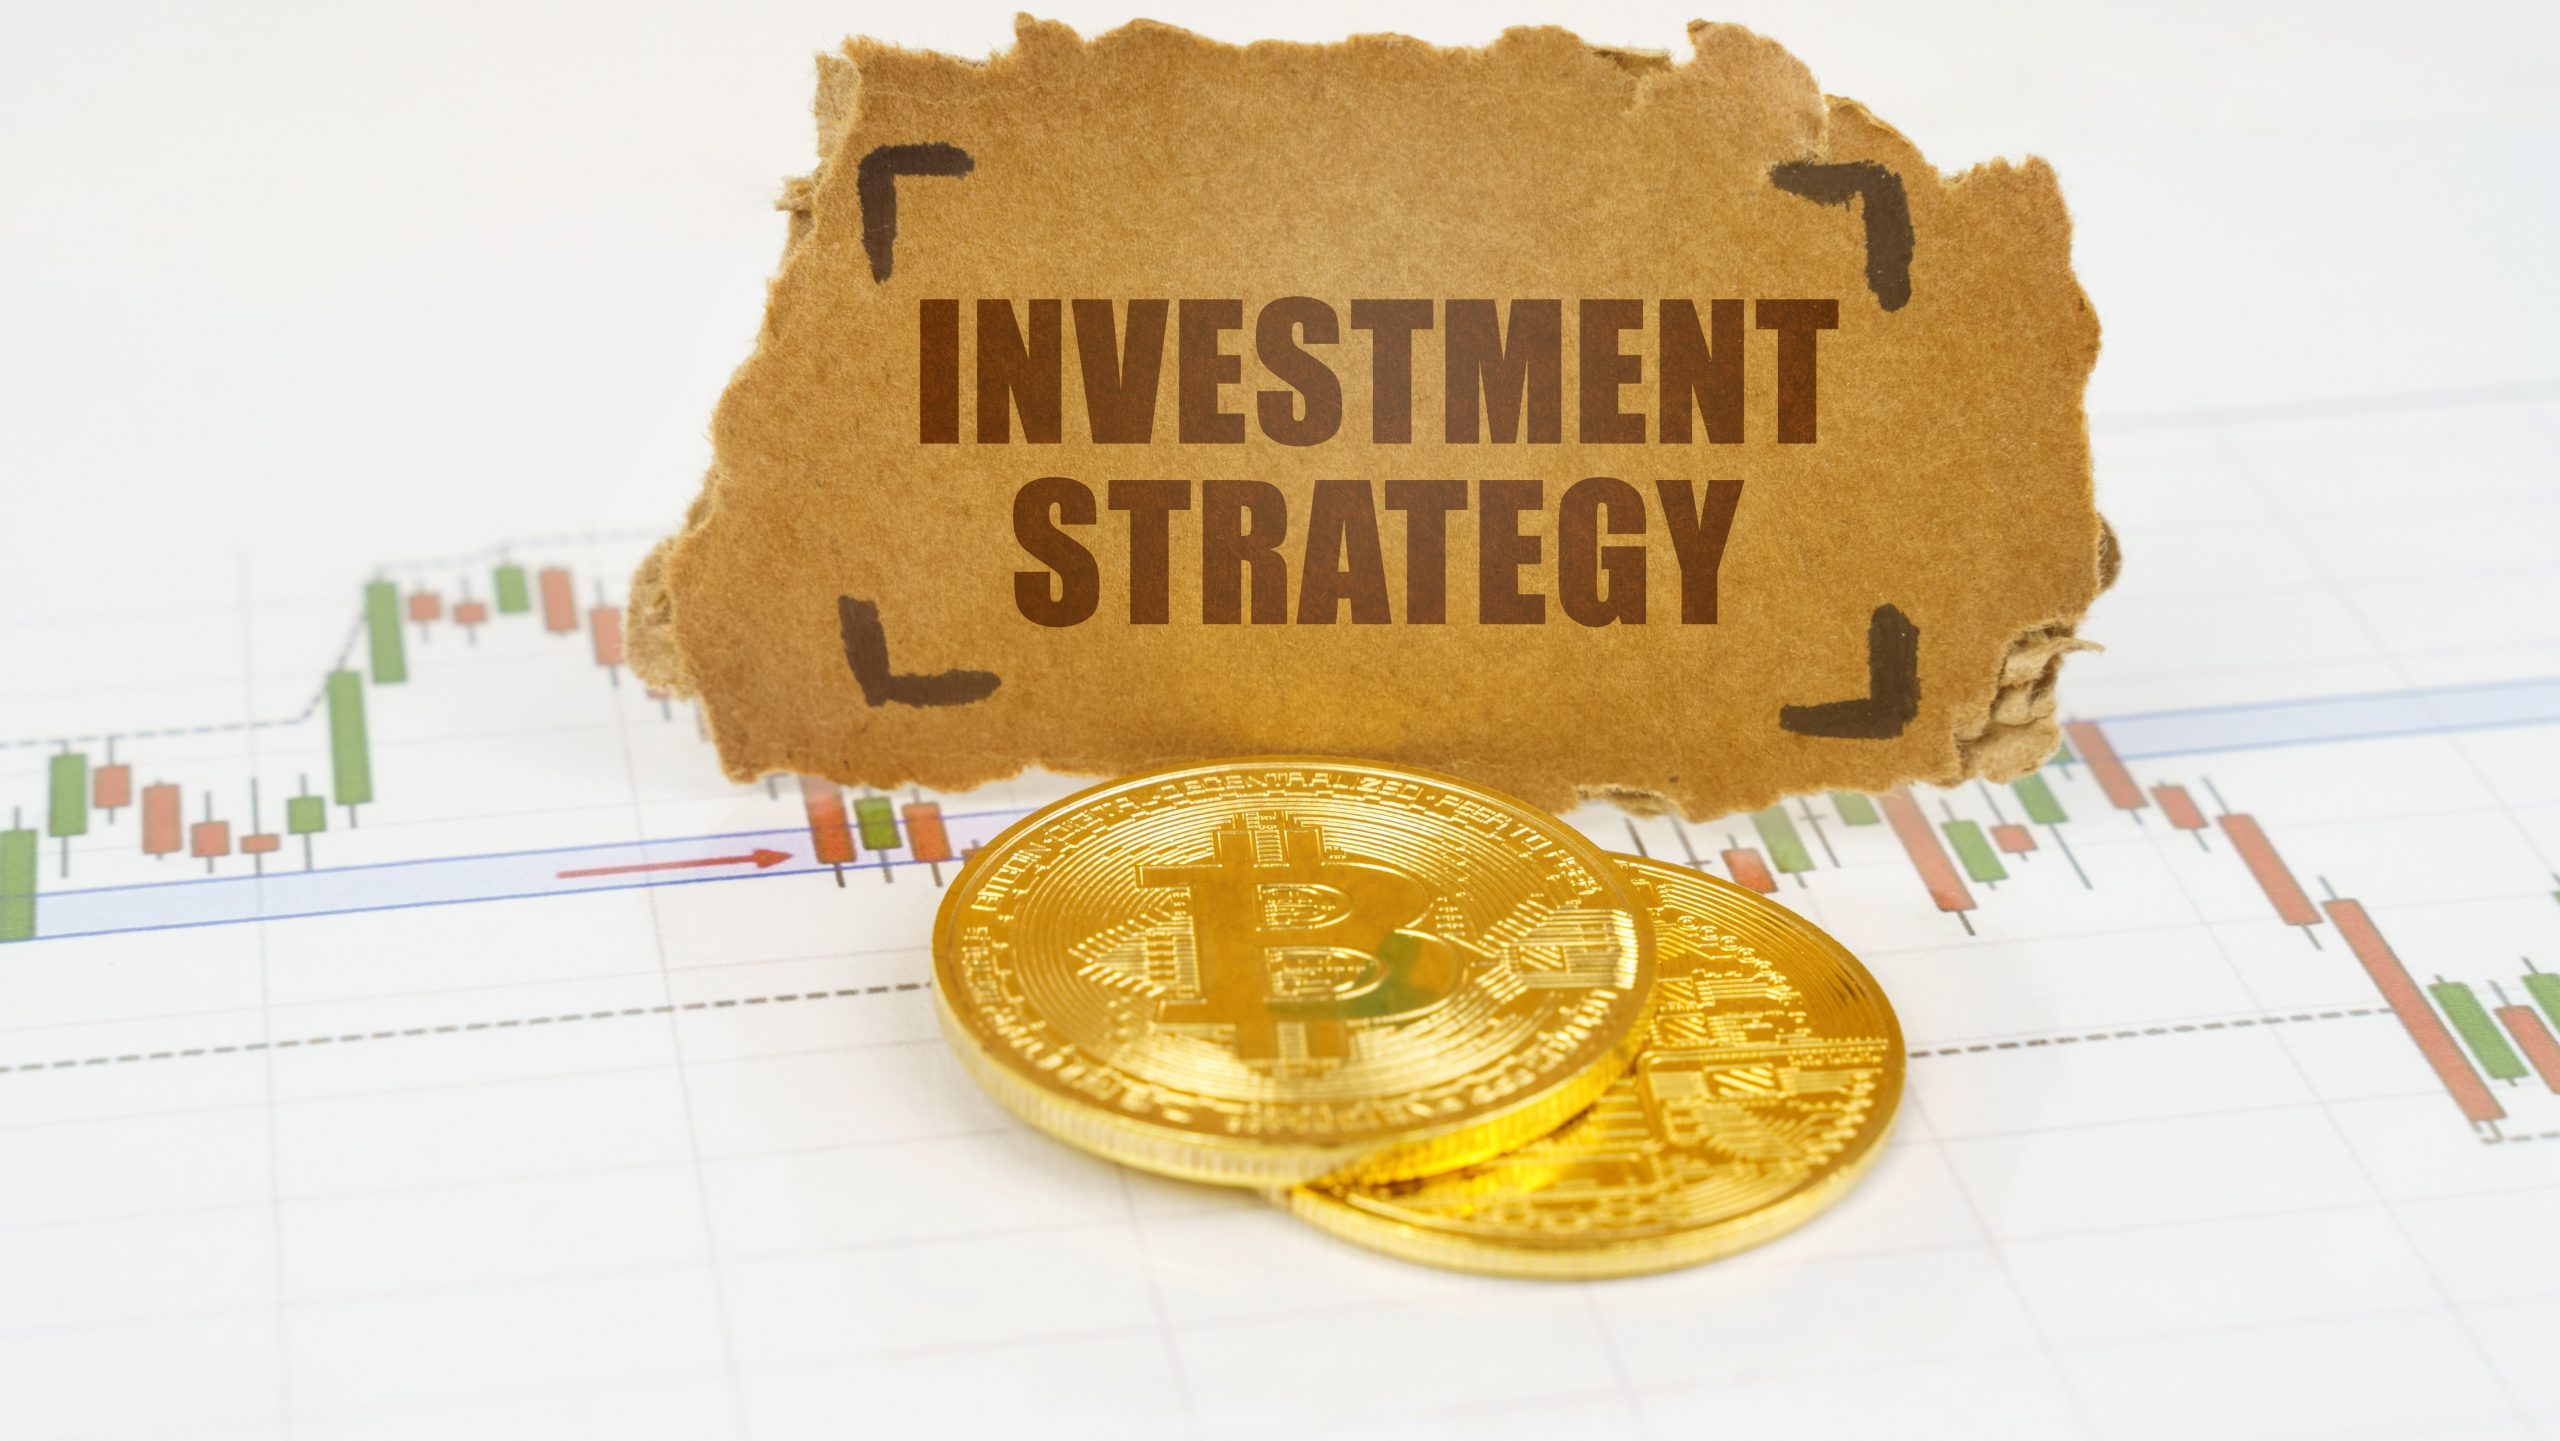 "Investment Strategy" text on cardboard above two physical bitcoins (Bitcoin in IRA)